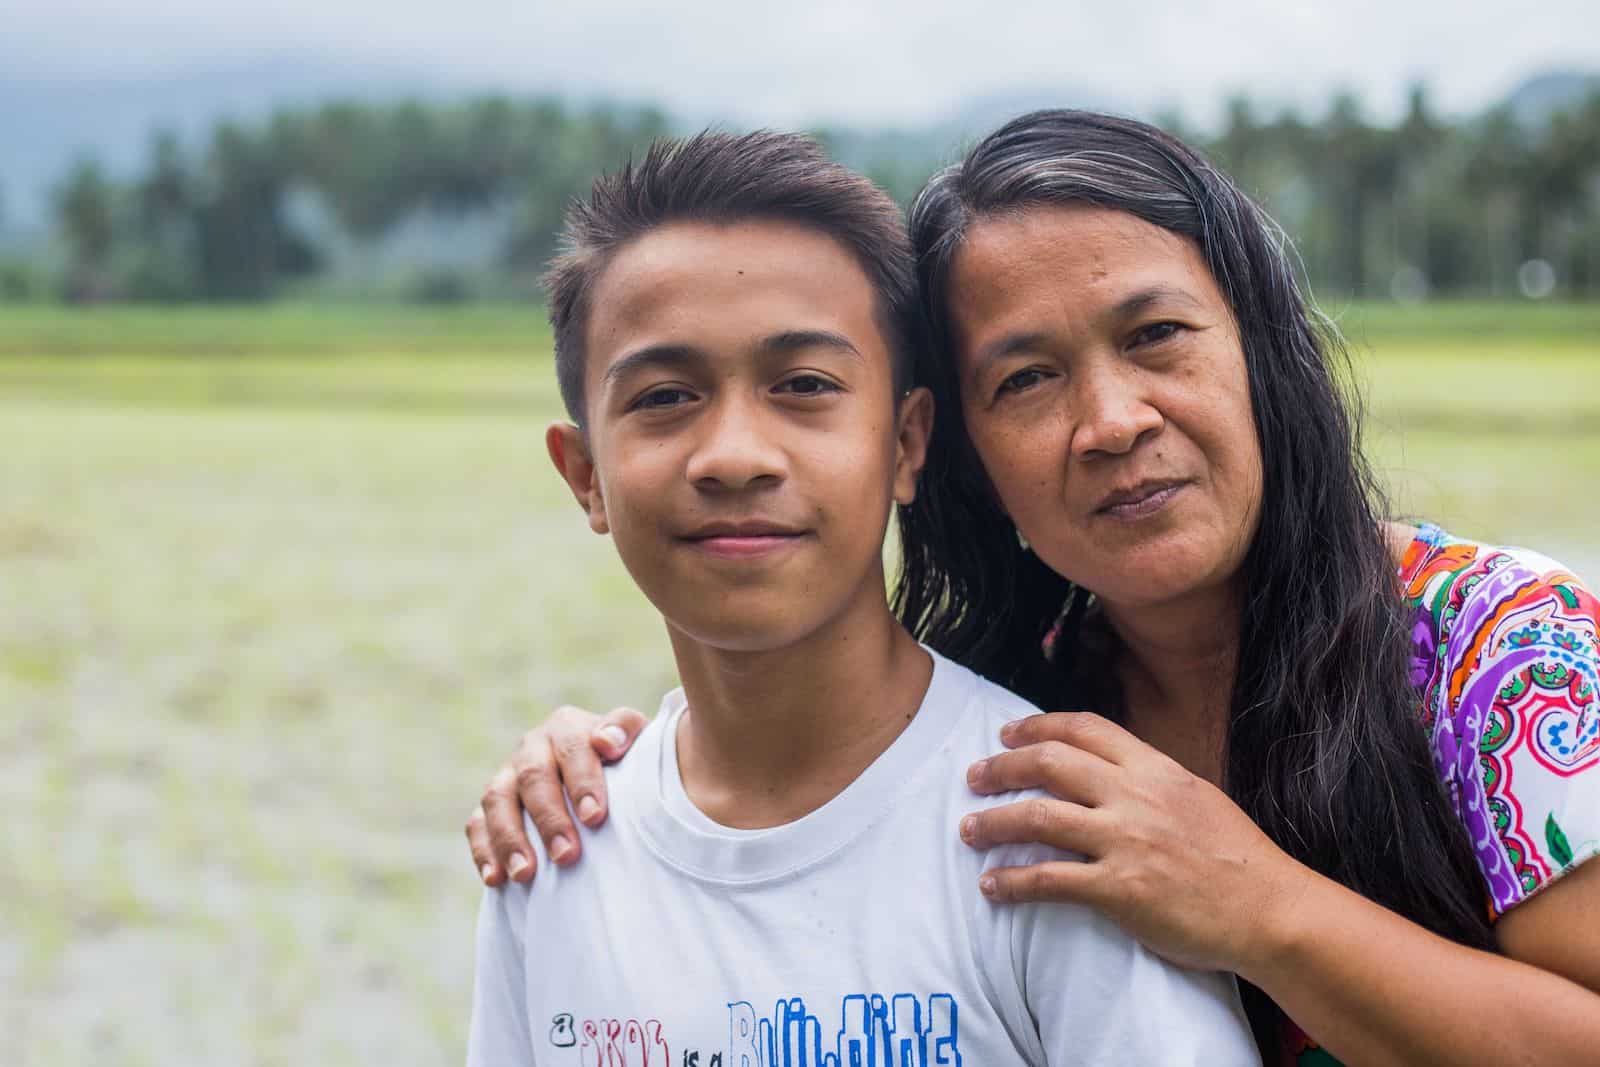 A woman has her arms around a teen boy in a white shirt, standing in front of a green field. 